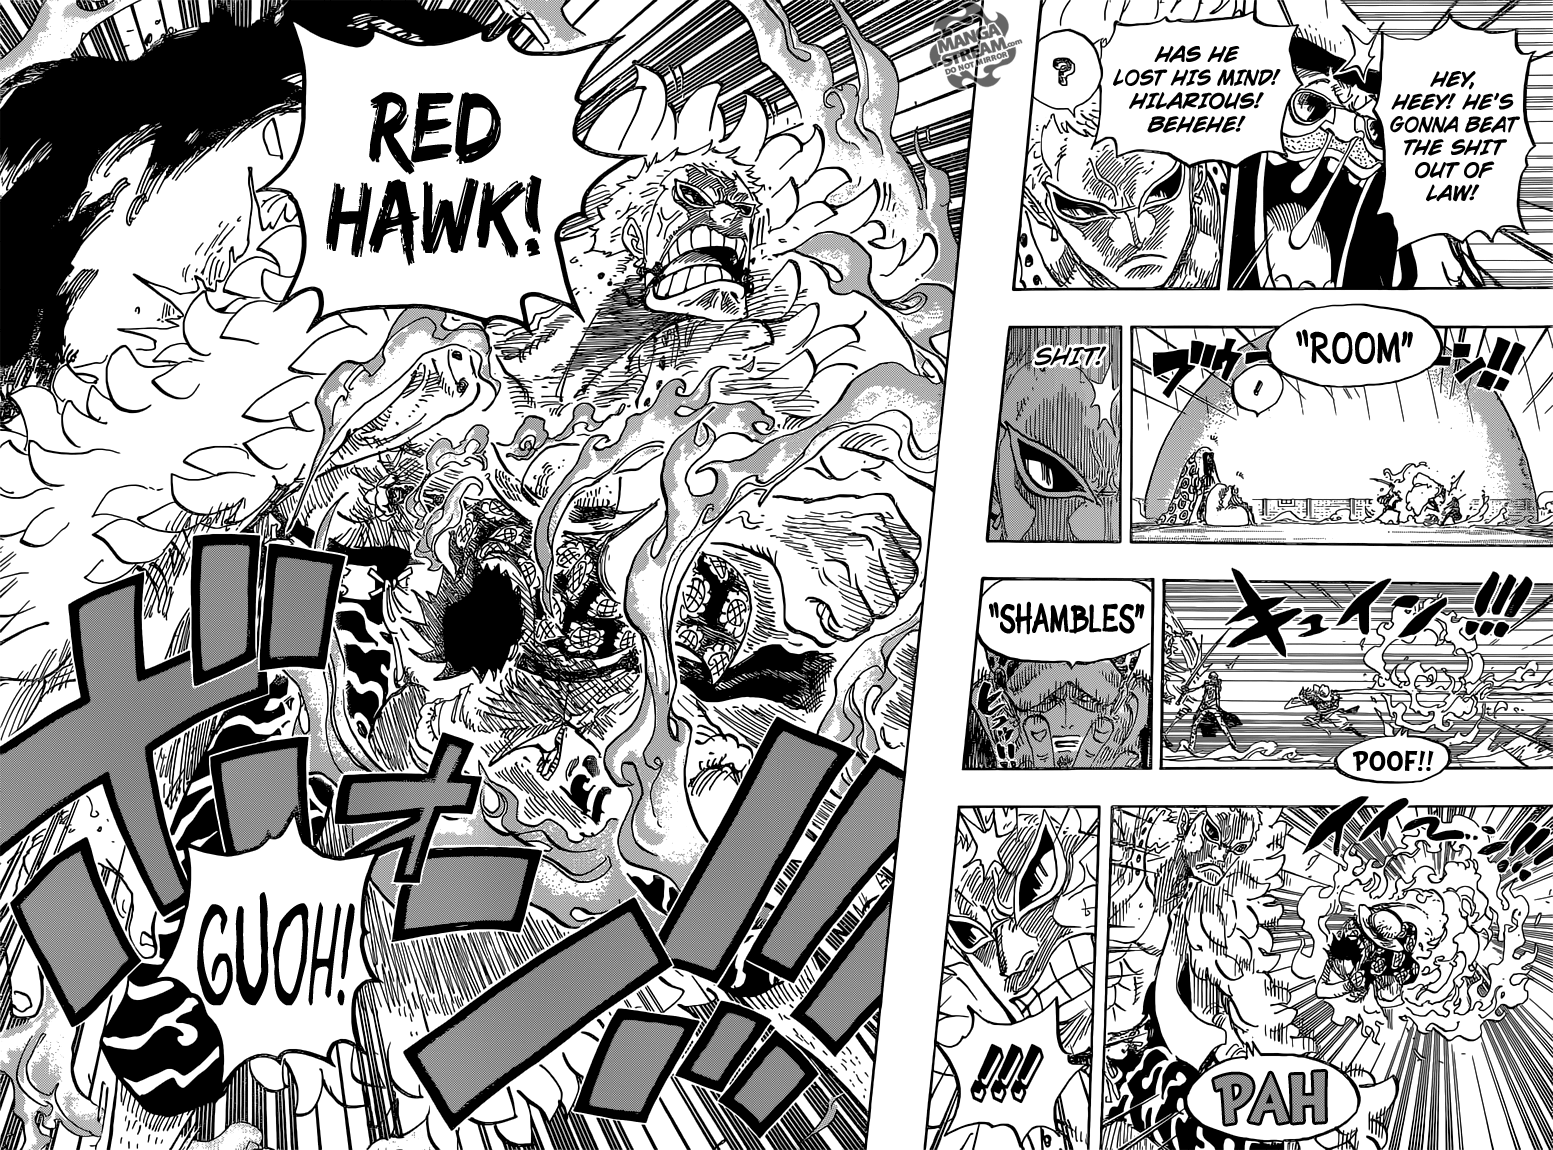 One Piece chapter 759 – no Red Hawk | 12Dimension